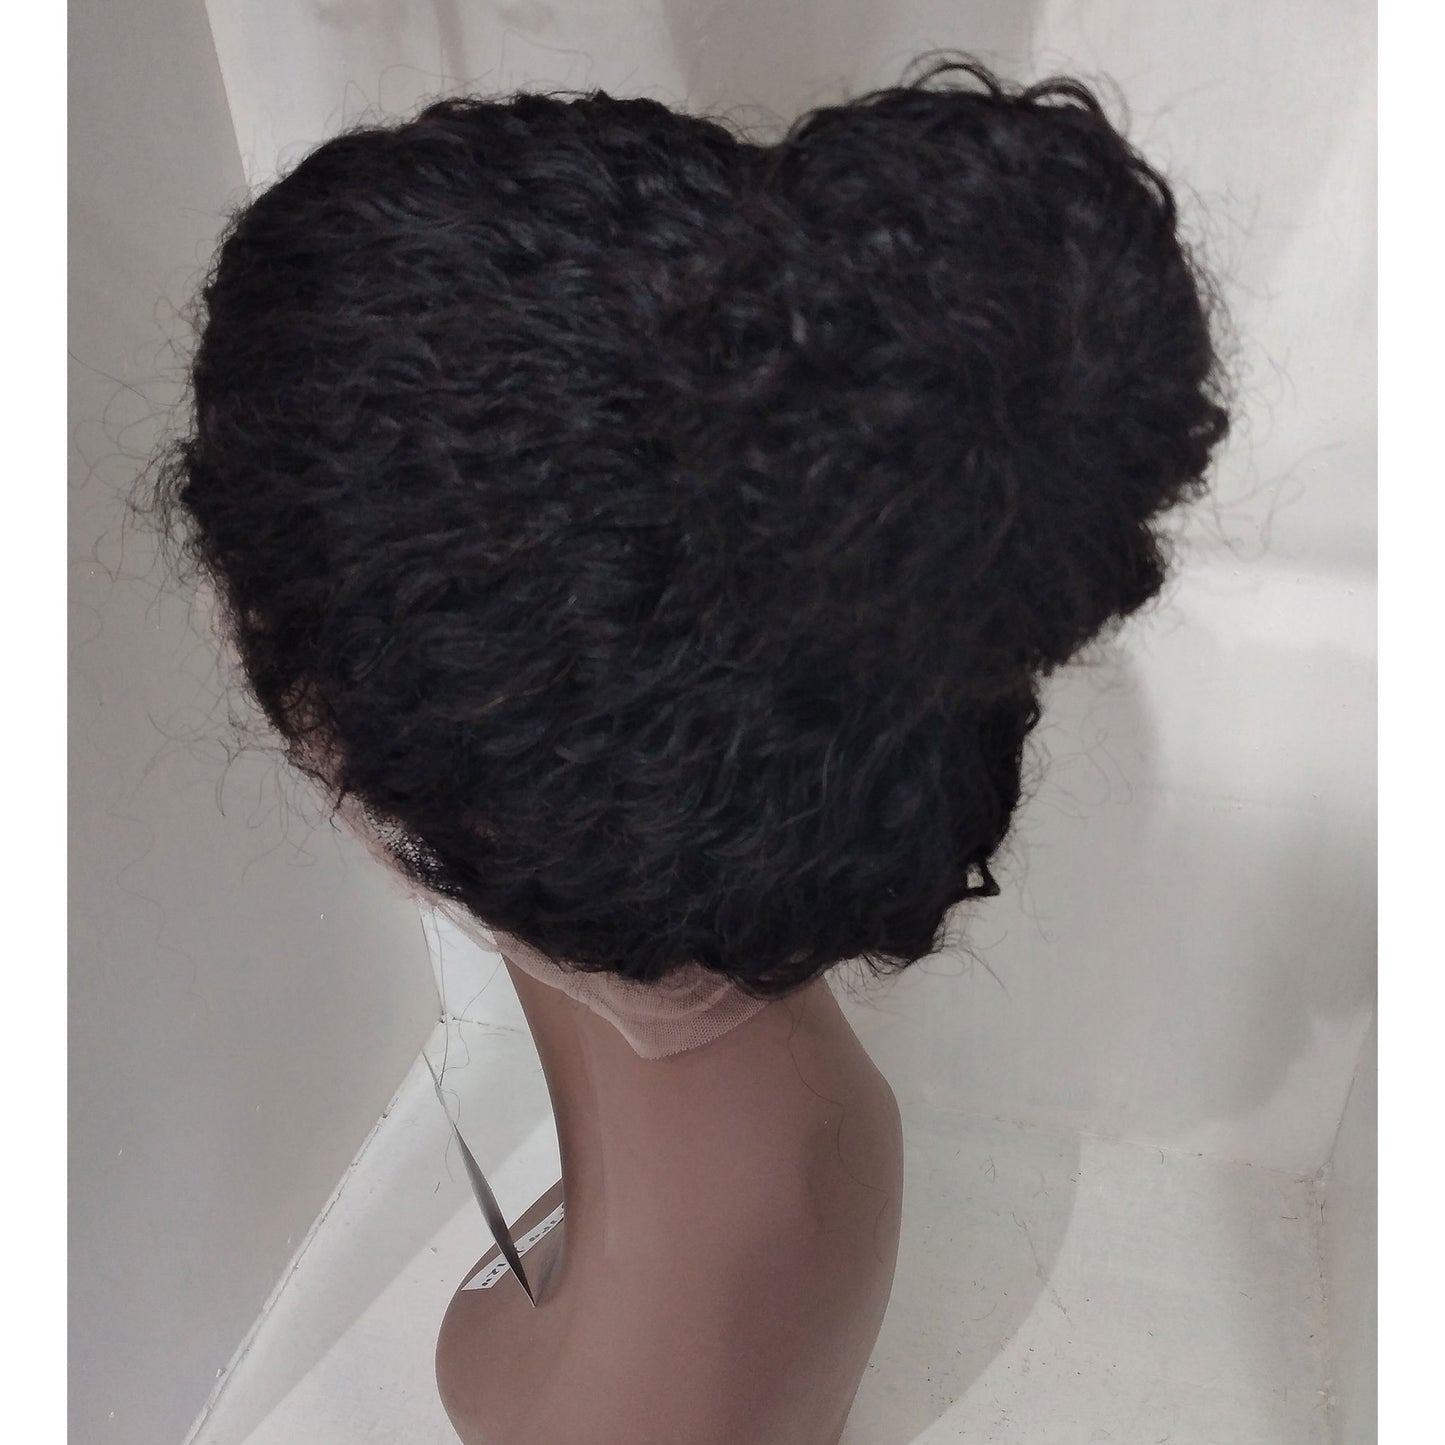 360 Wig Lace Black Curly